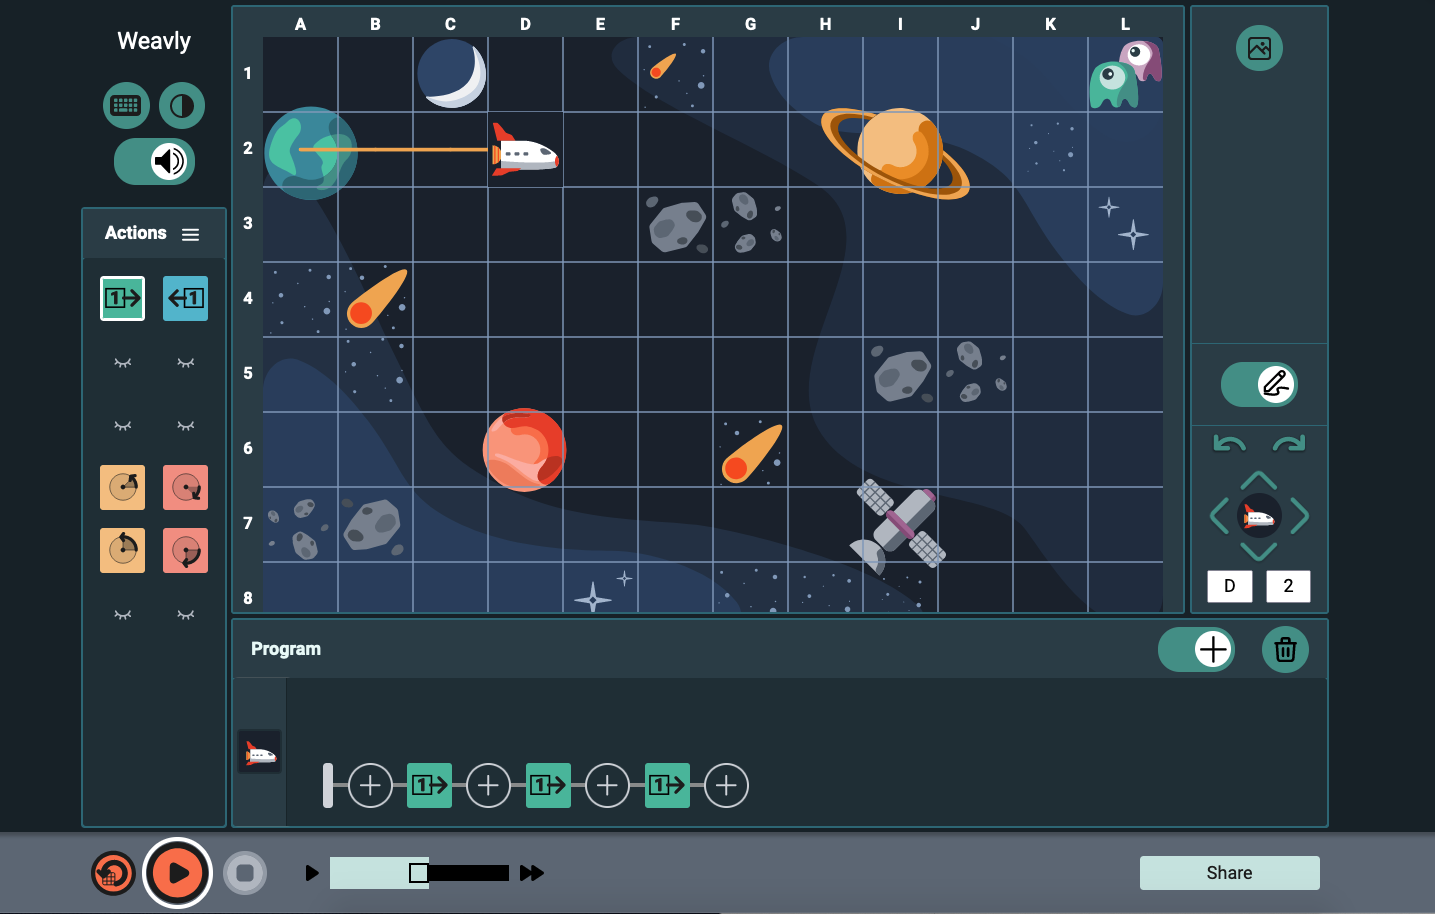 Weavly coding environment with the space background